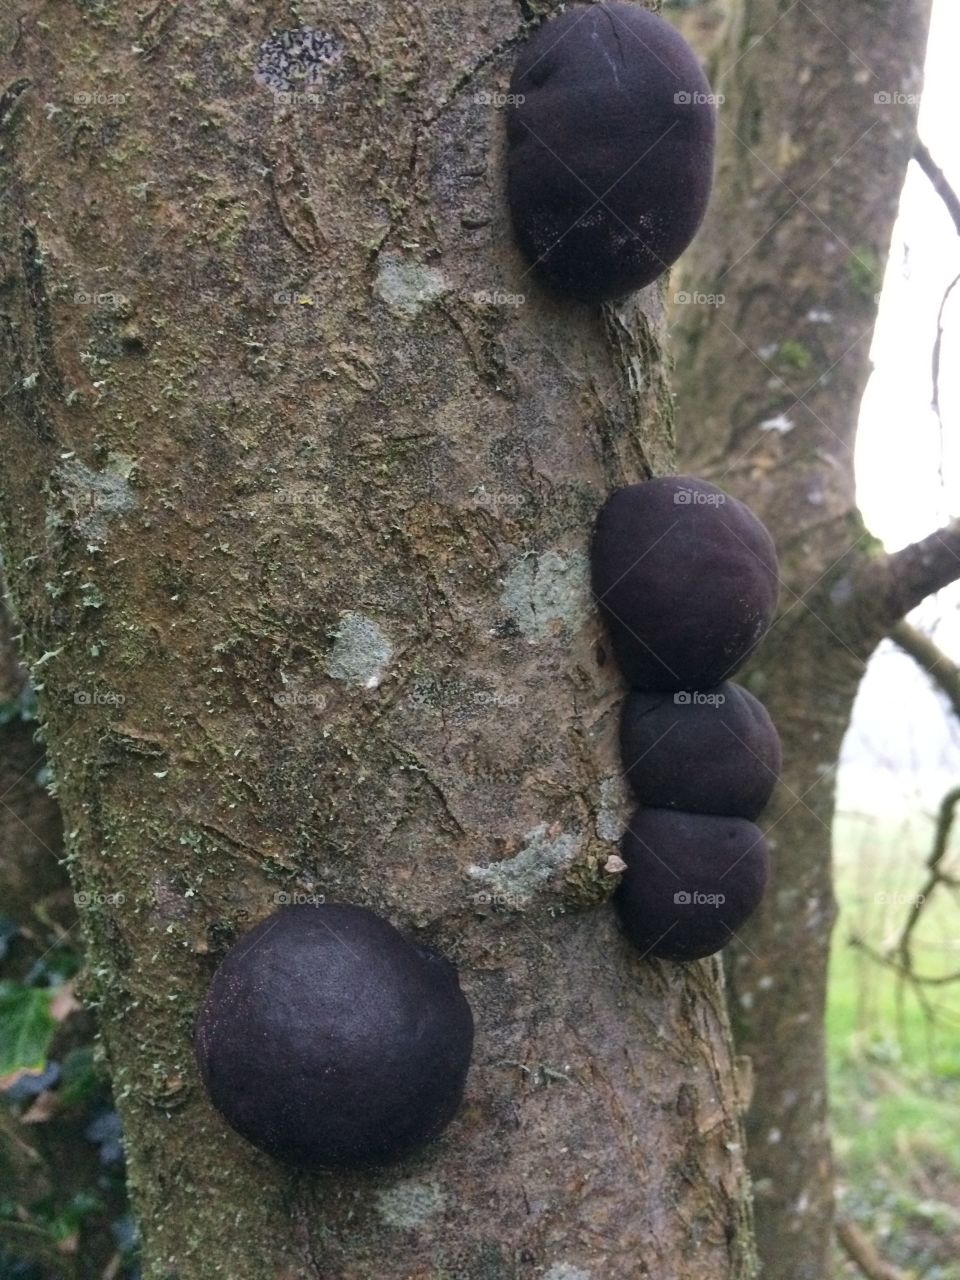 Tree infected with spheroidal growths of fungus